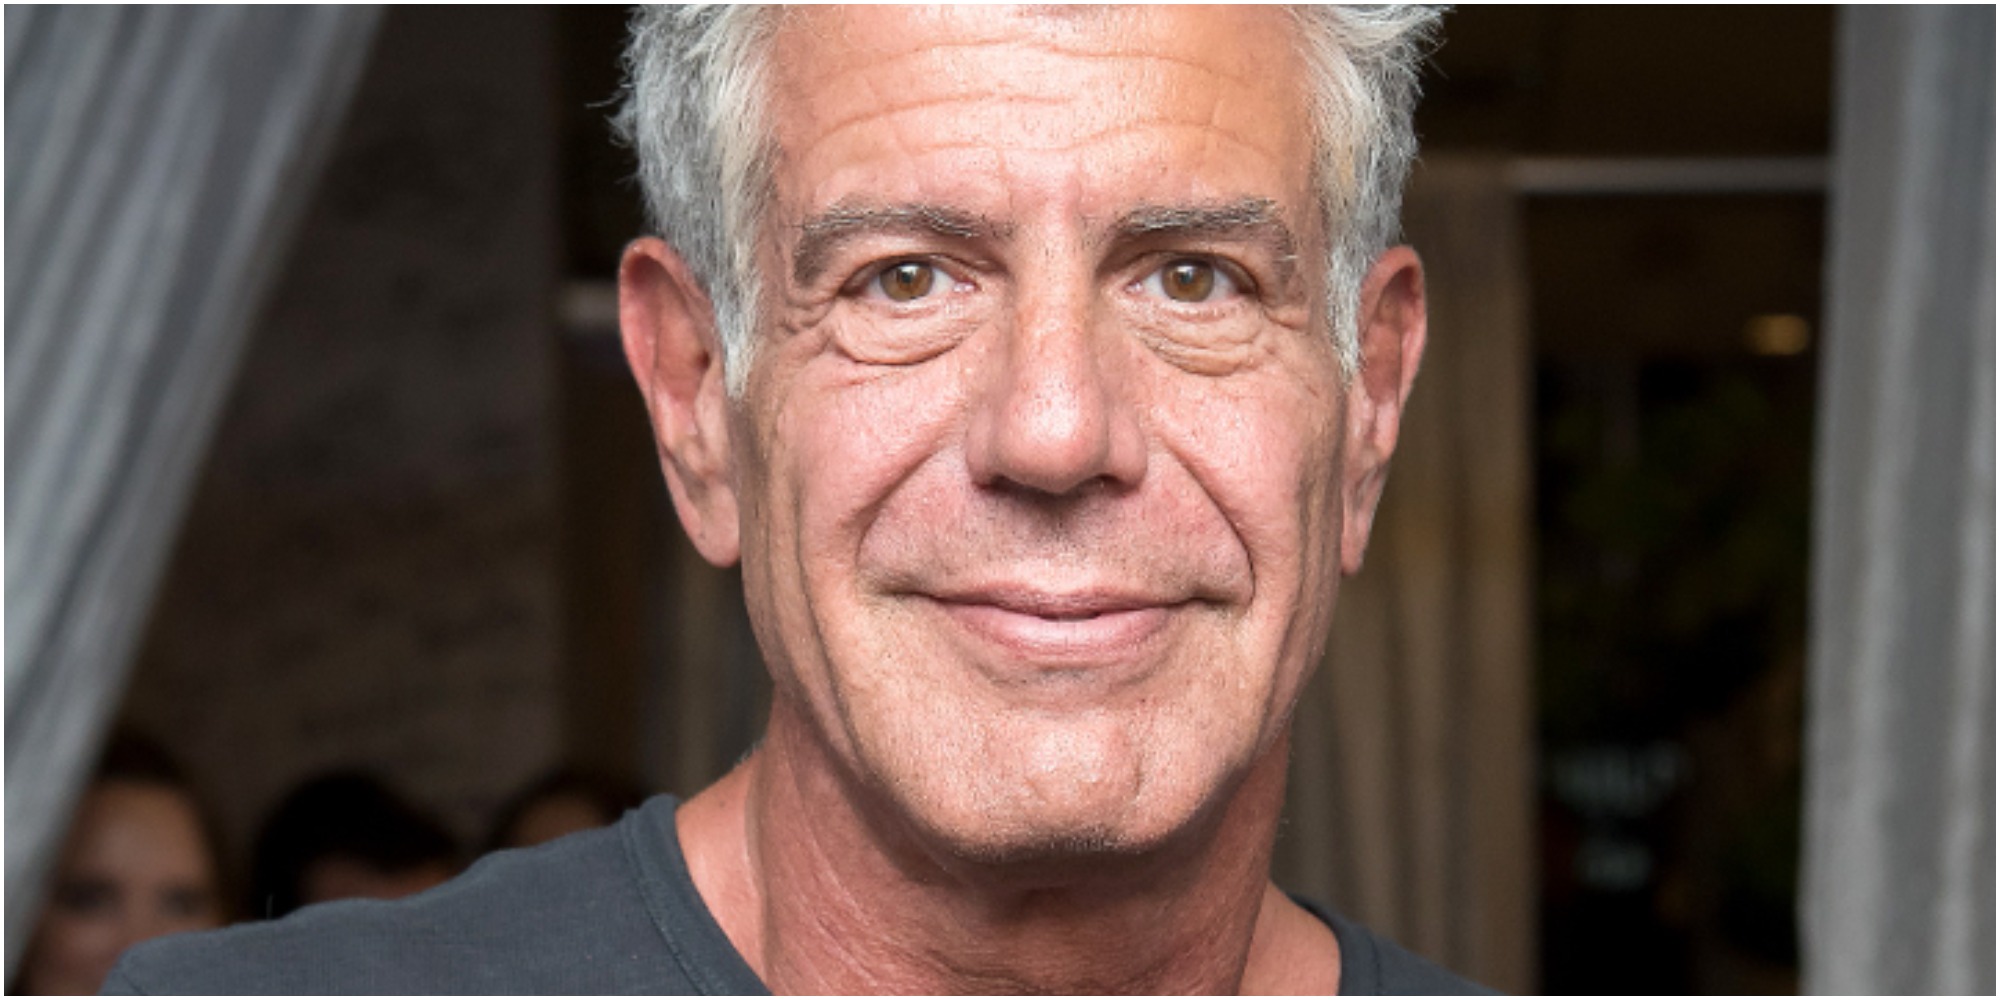 Anthony Bourdain poses in a t-shirt.